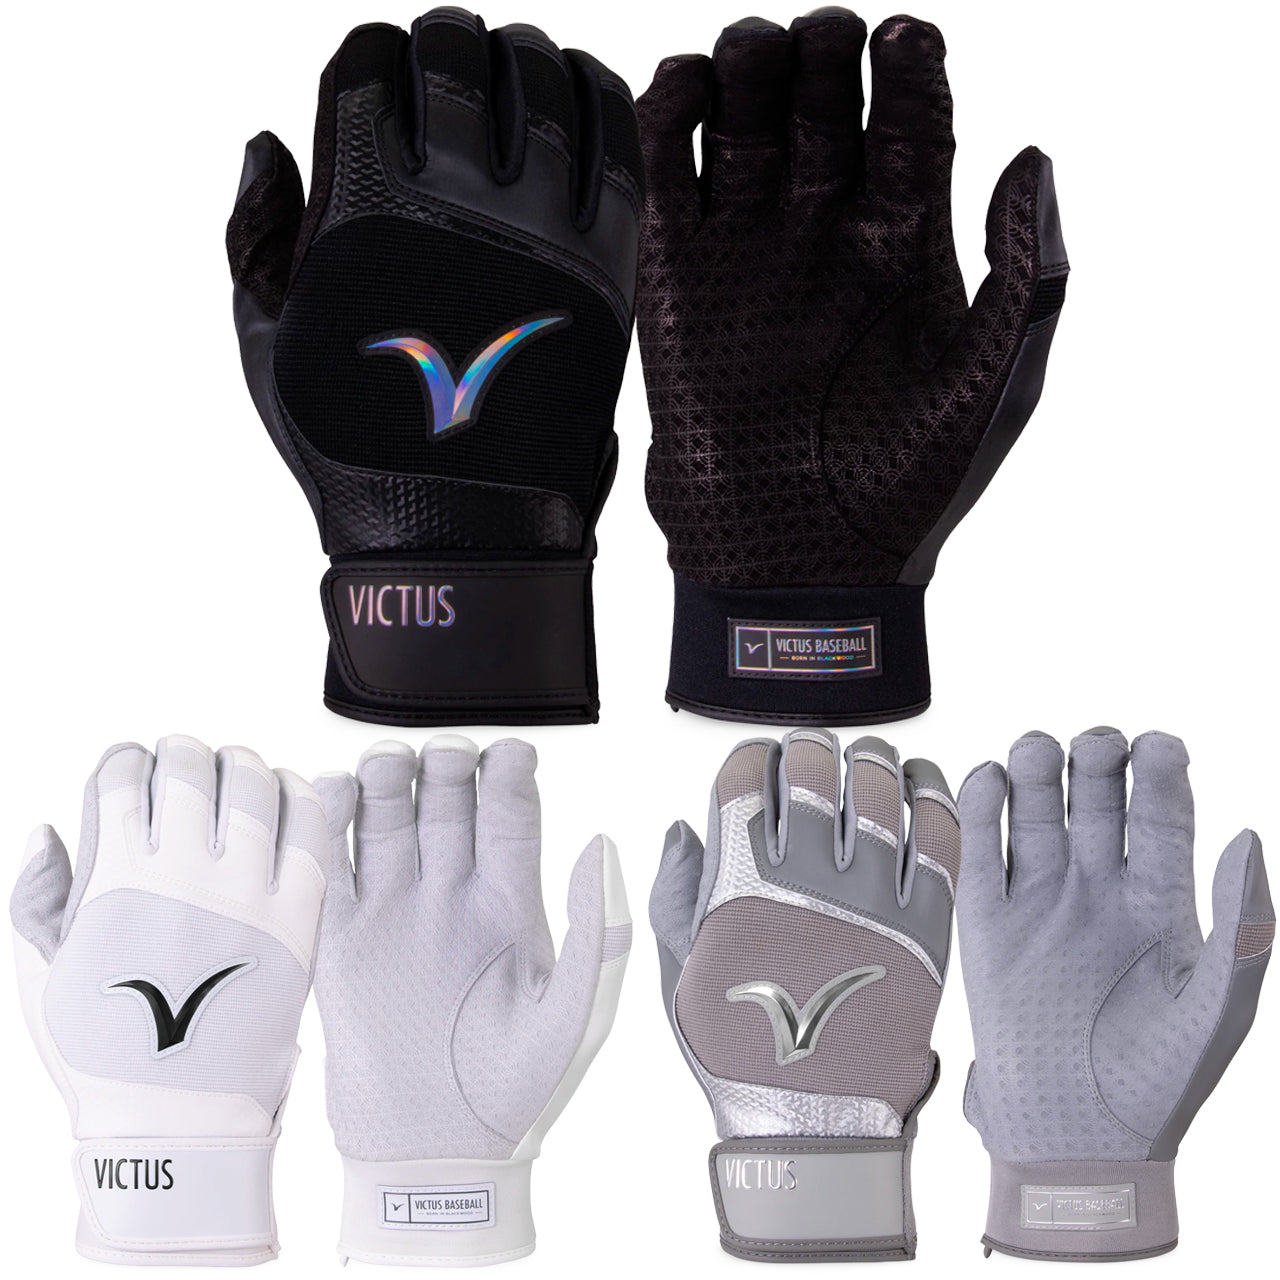 Victus Debut Batting Gloves - Youth